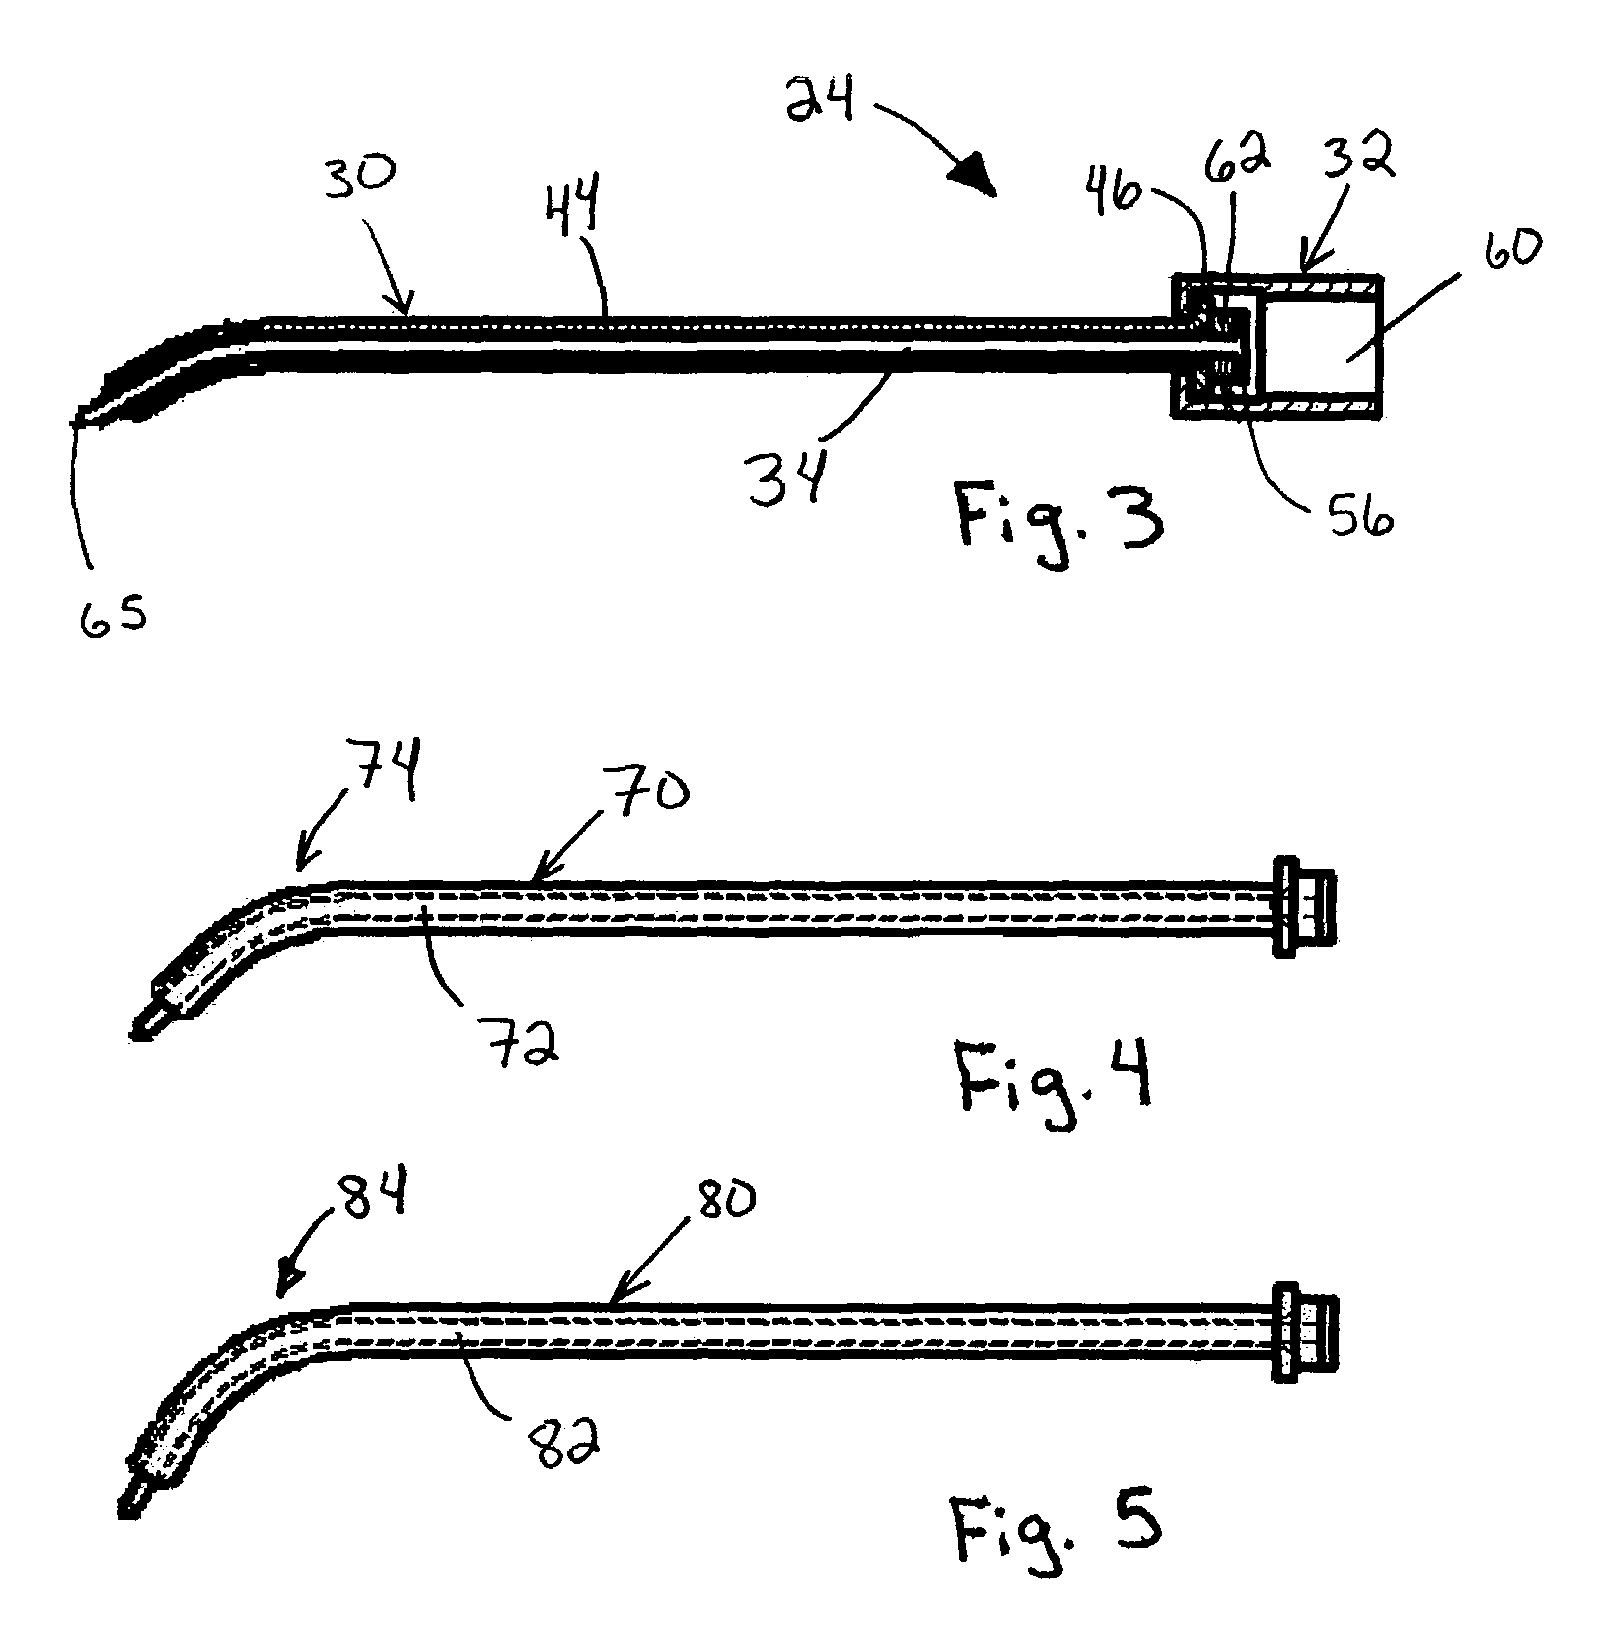 Method for performing automated microfracture